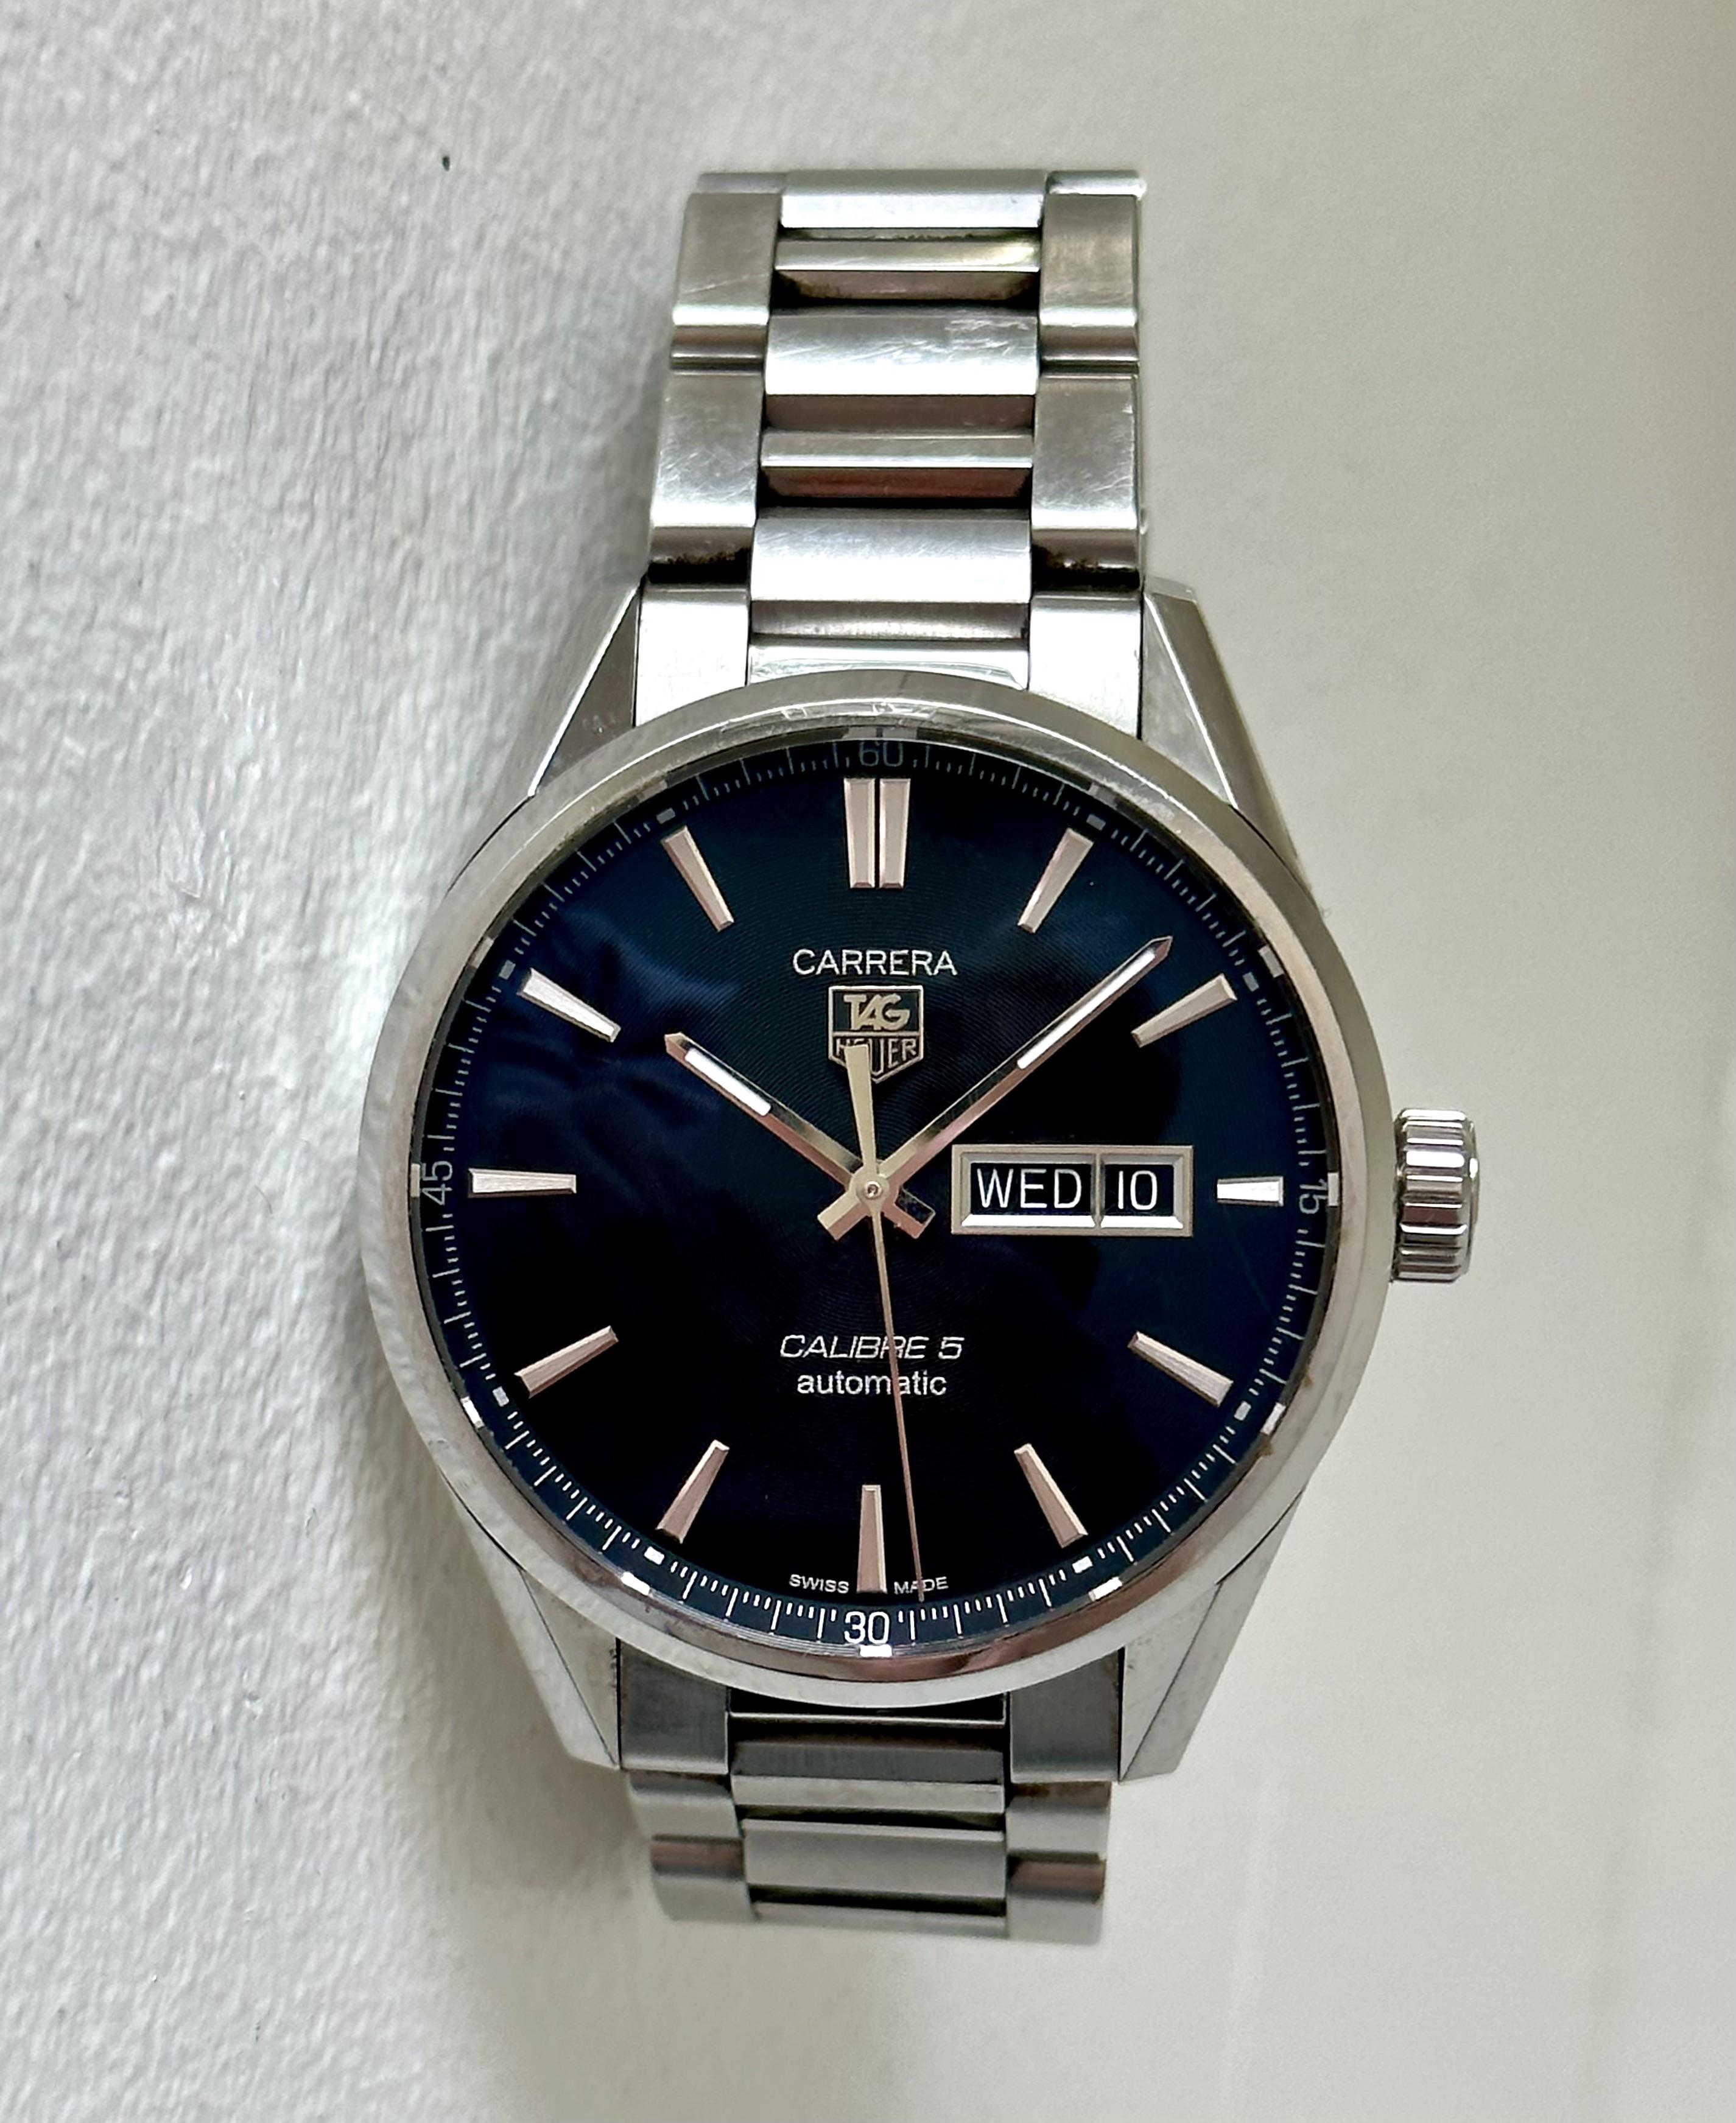 TAG Heuer Formula 1 Calibre 16 for $1,956 for sale from a Private